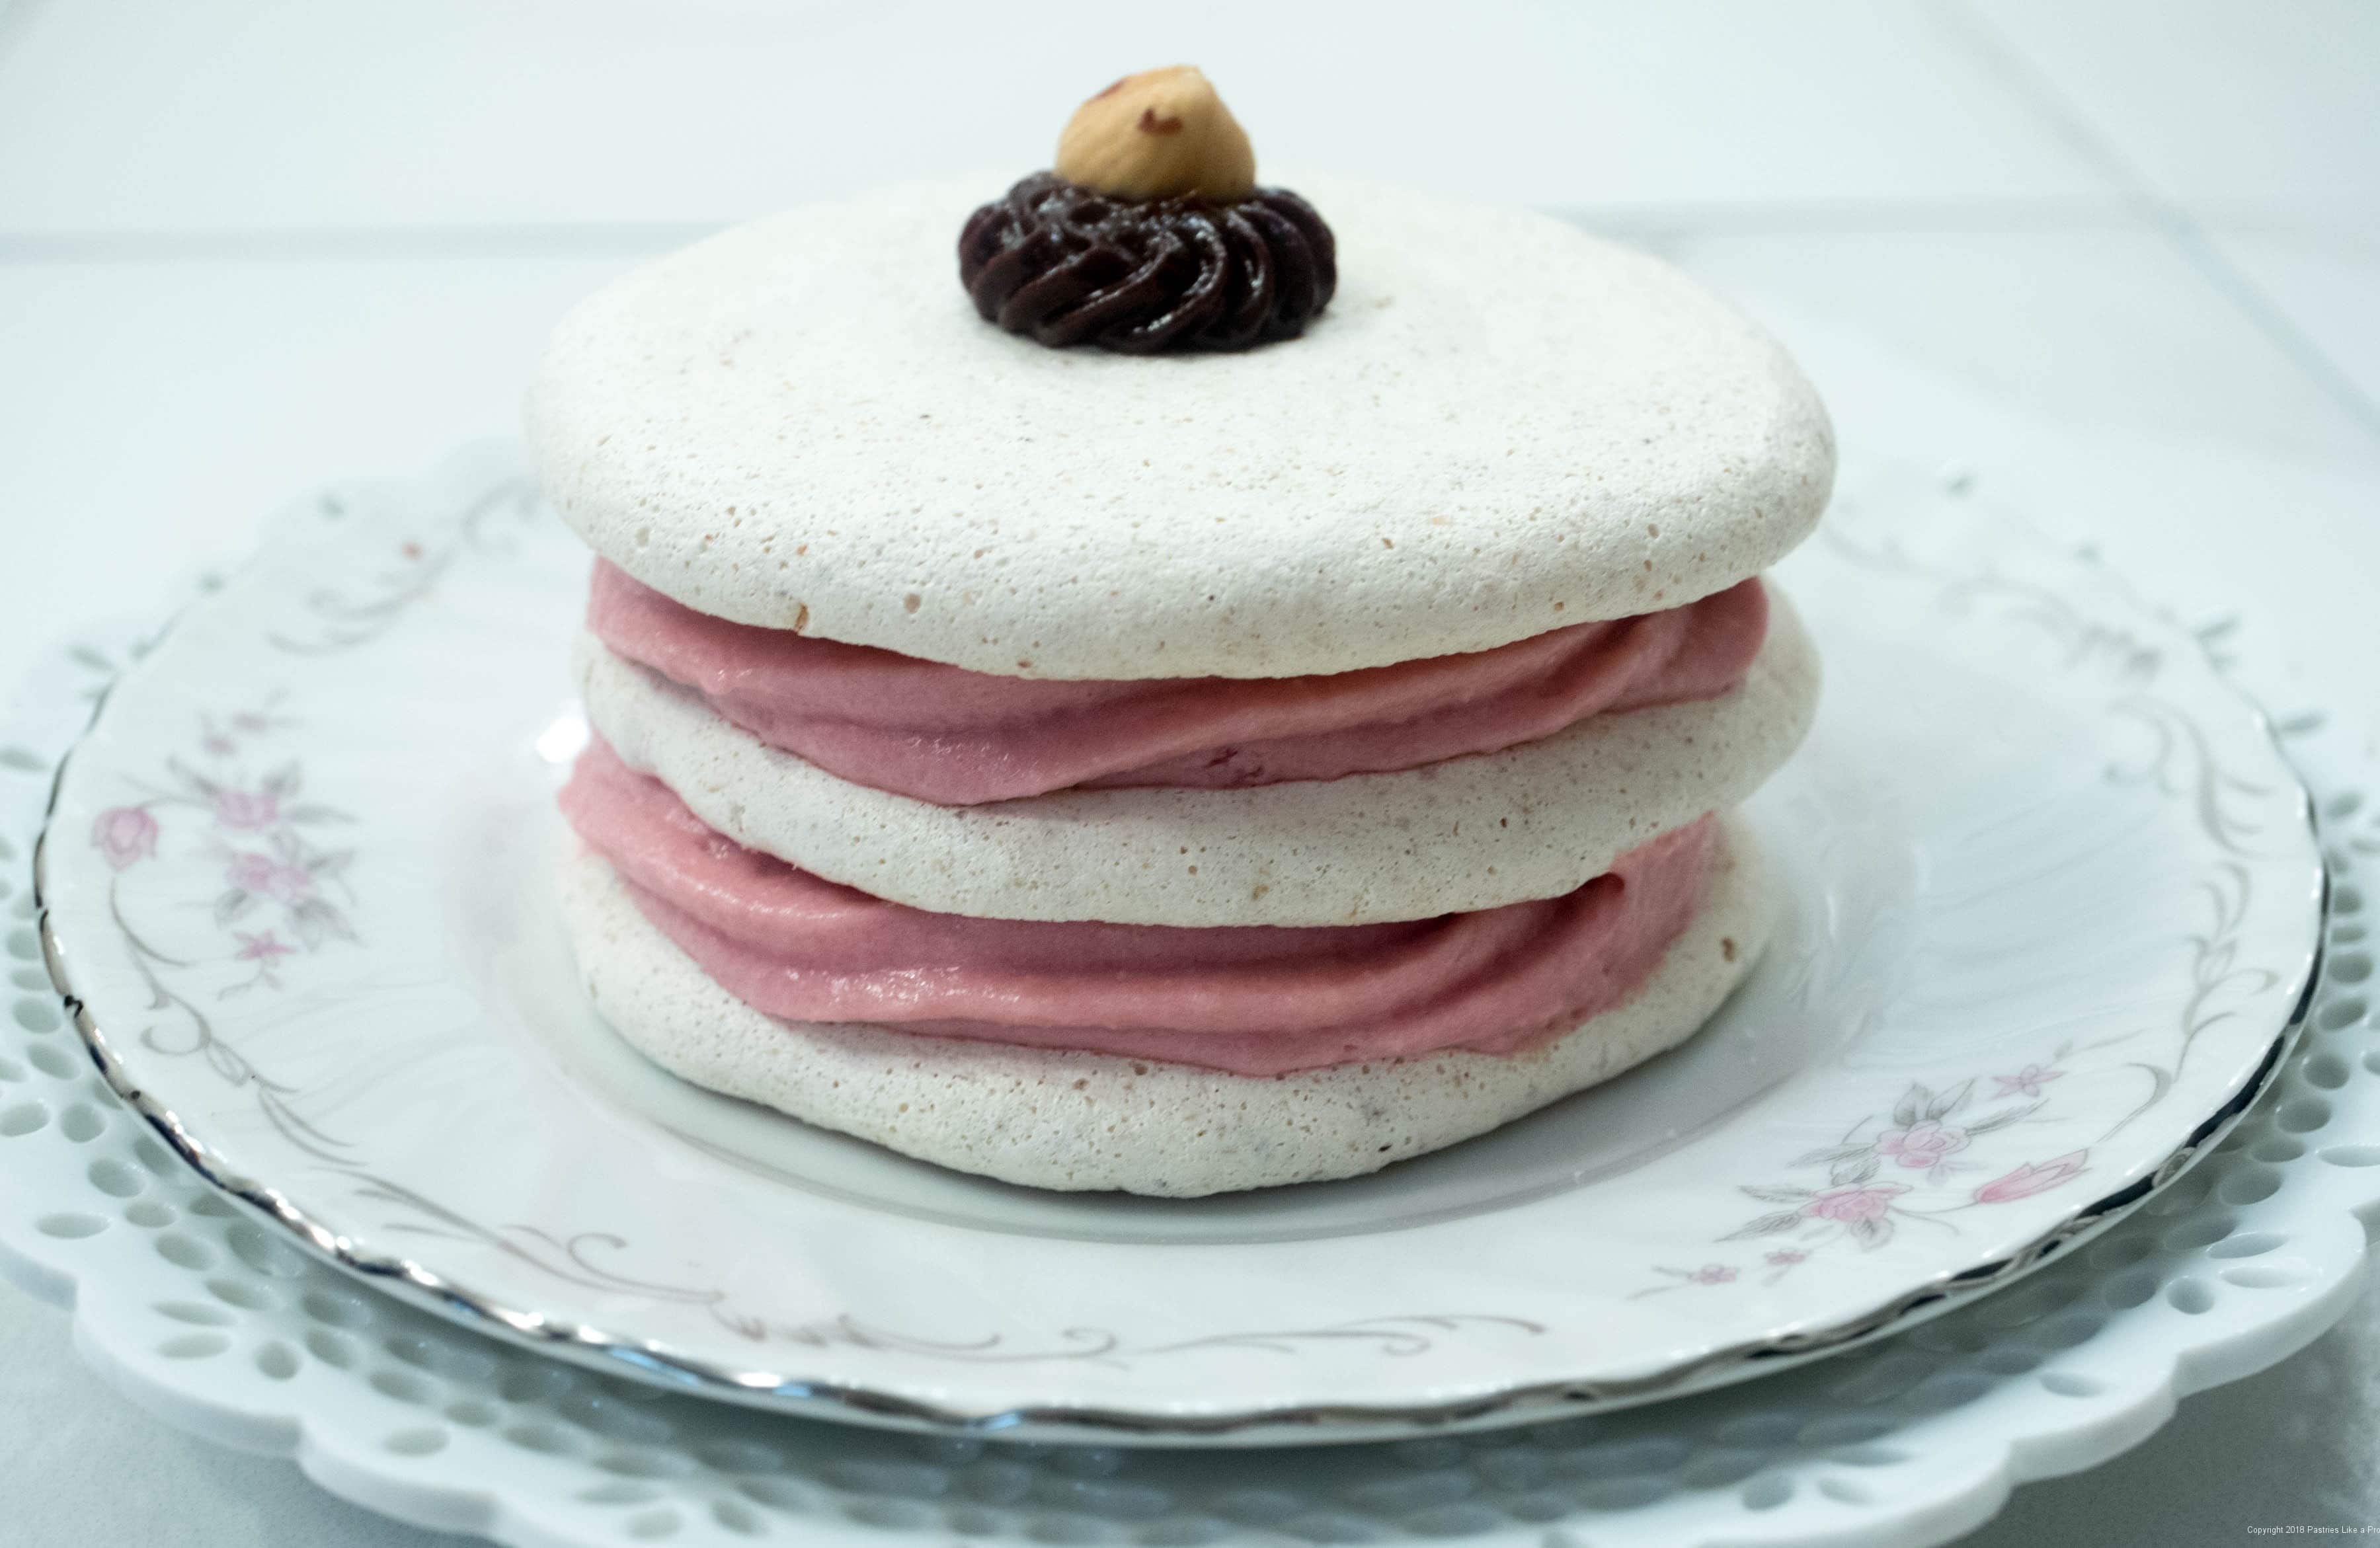 Giant Macaron filled with Vanilla Pastry Cream and Swiss Meringue